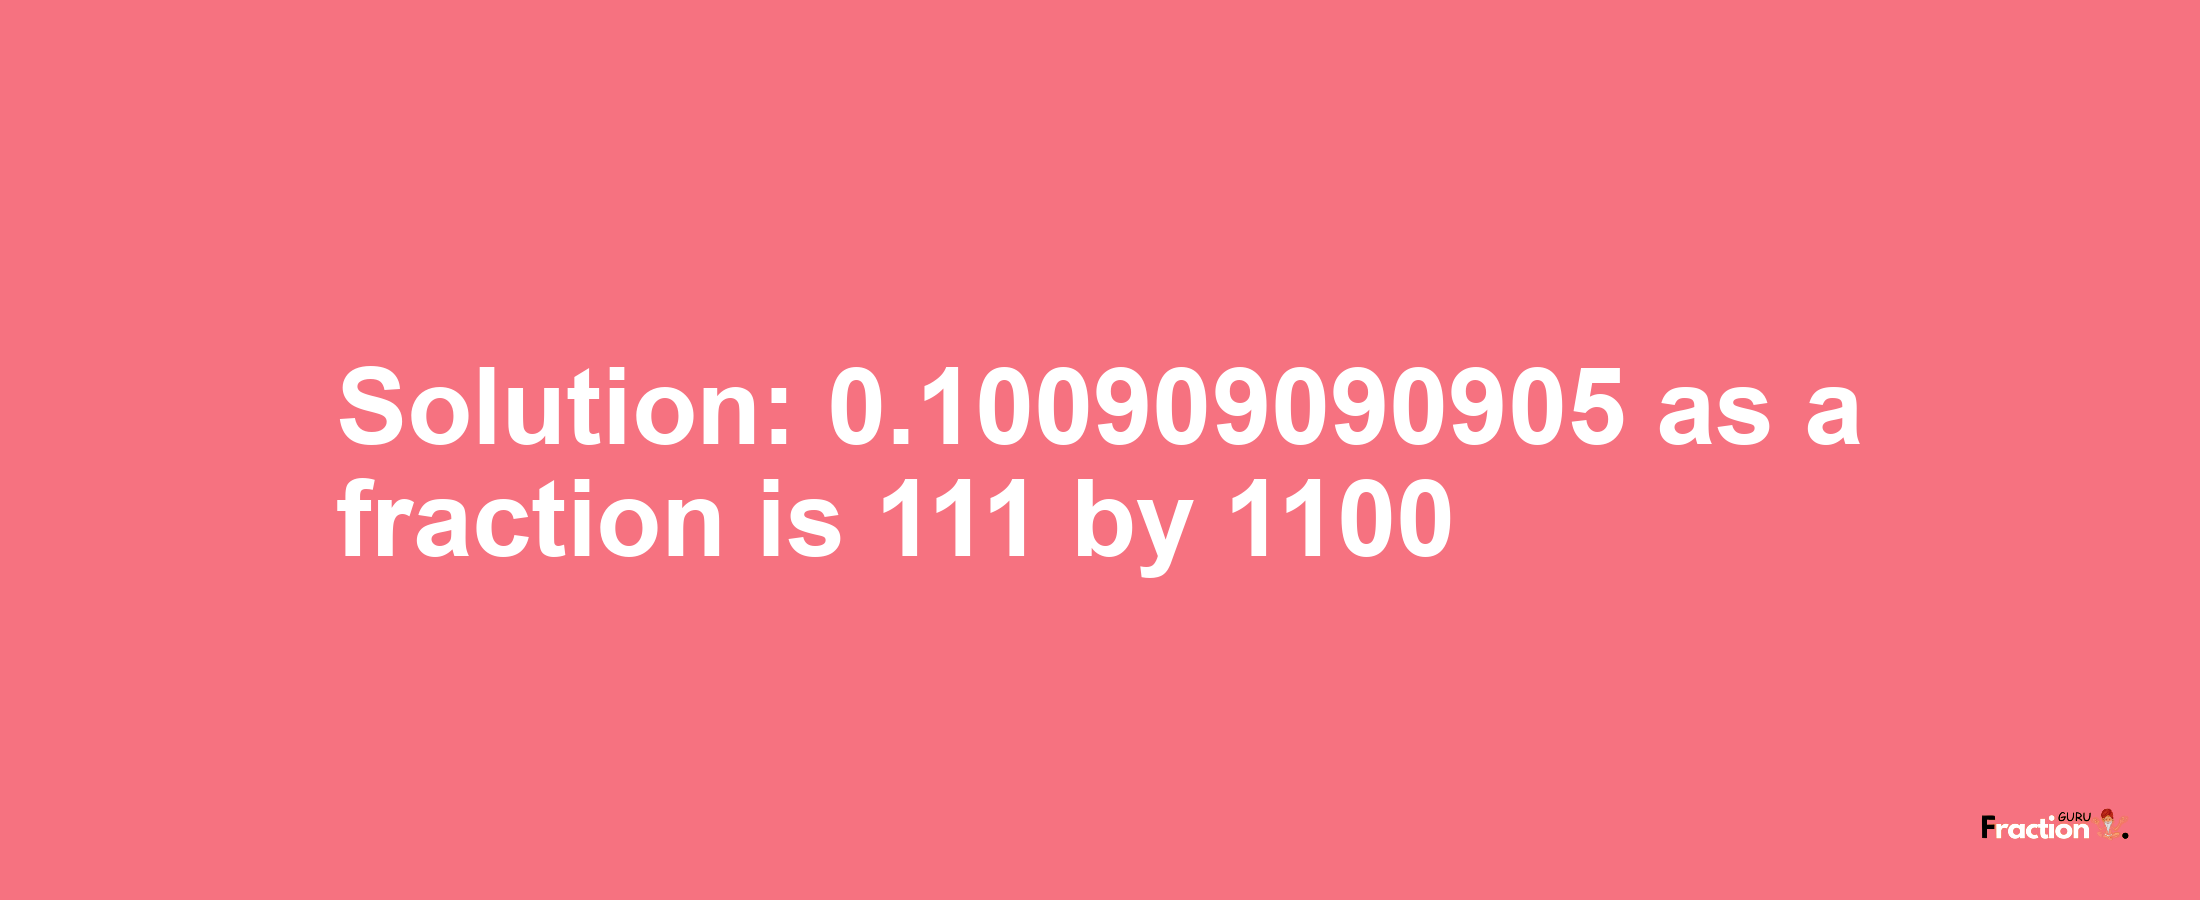 Solution:0.100909090905 as a fraction is 111/1100